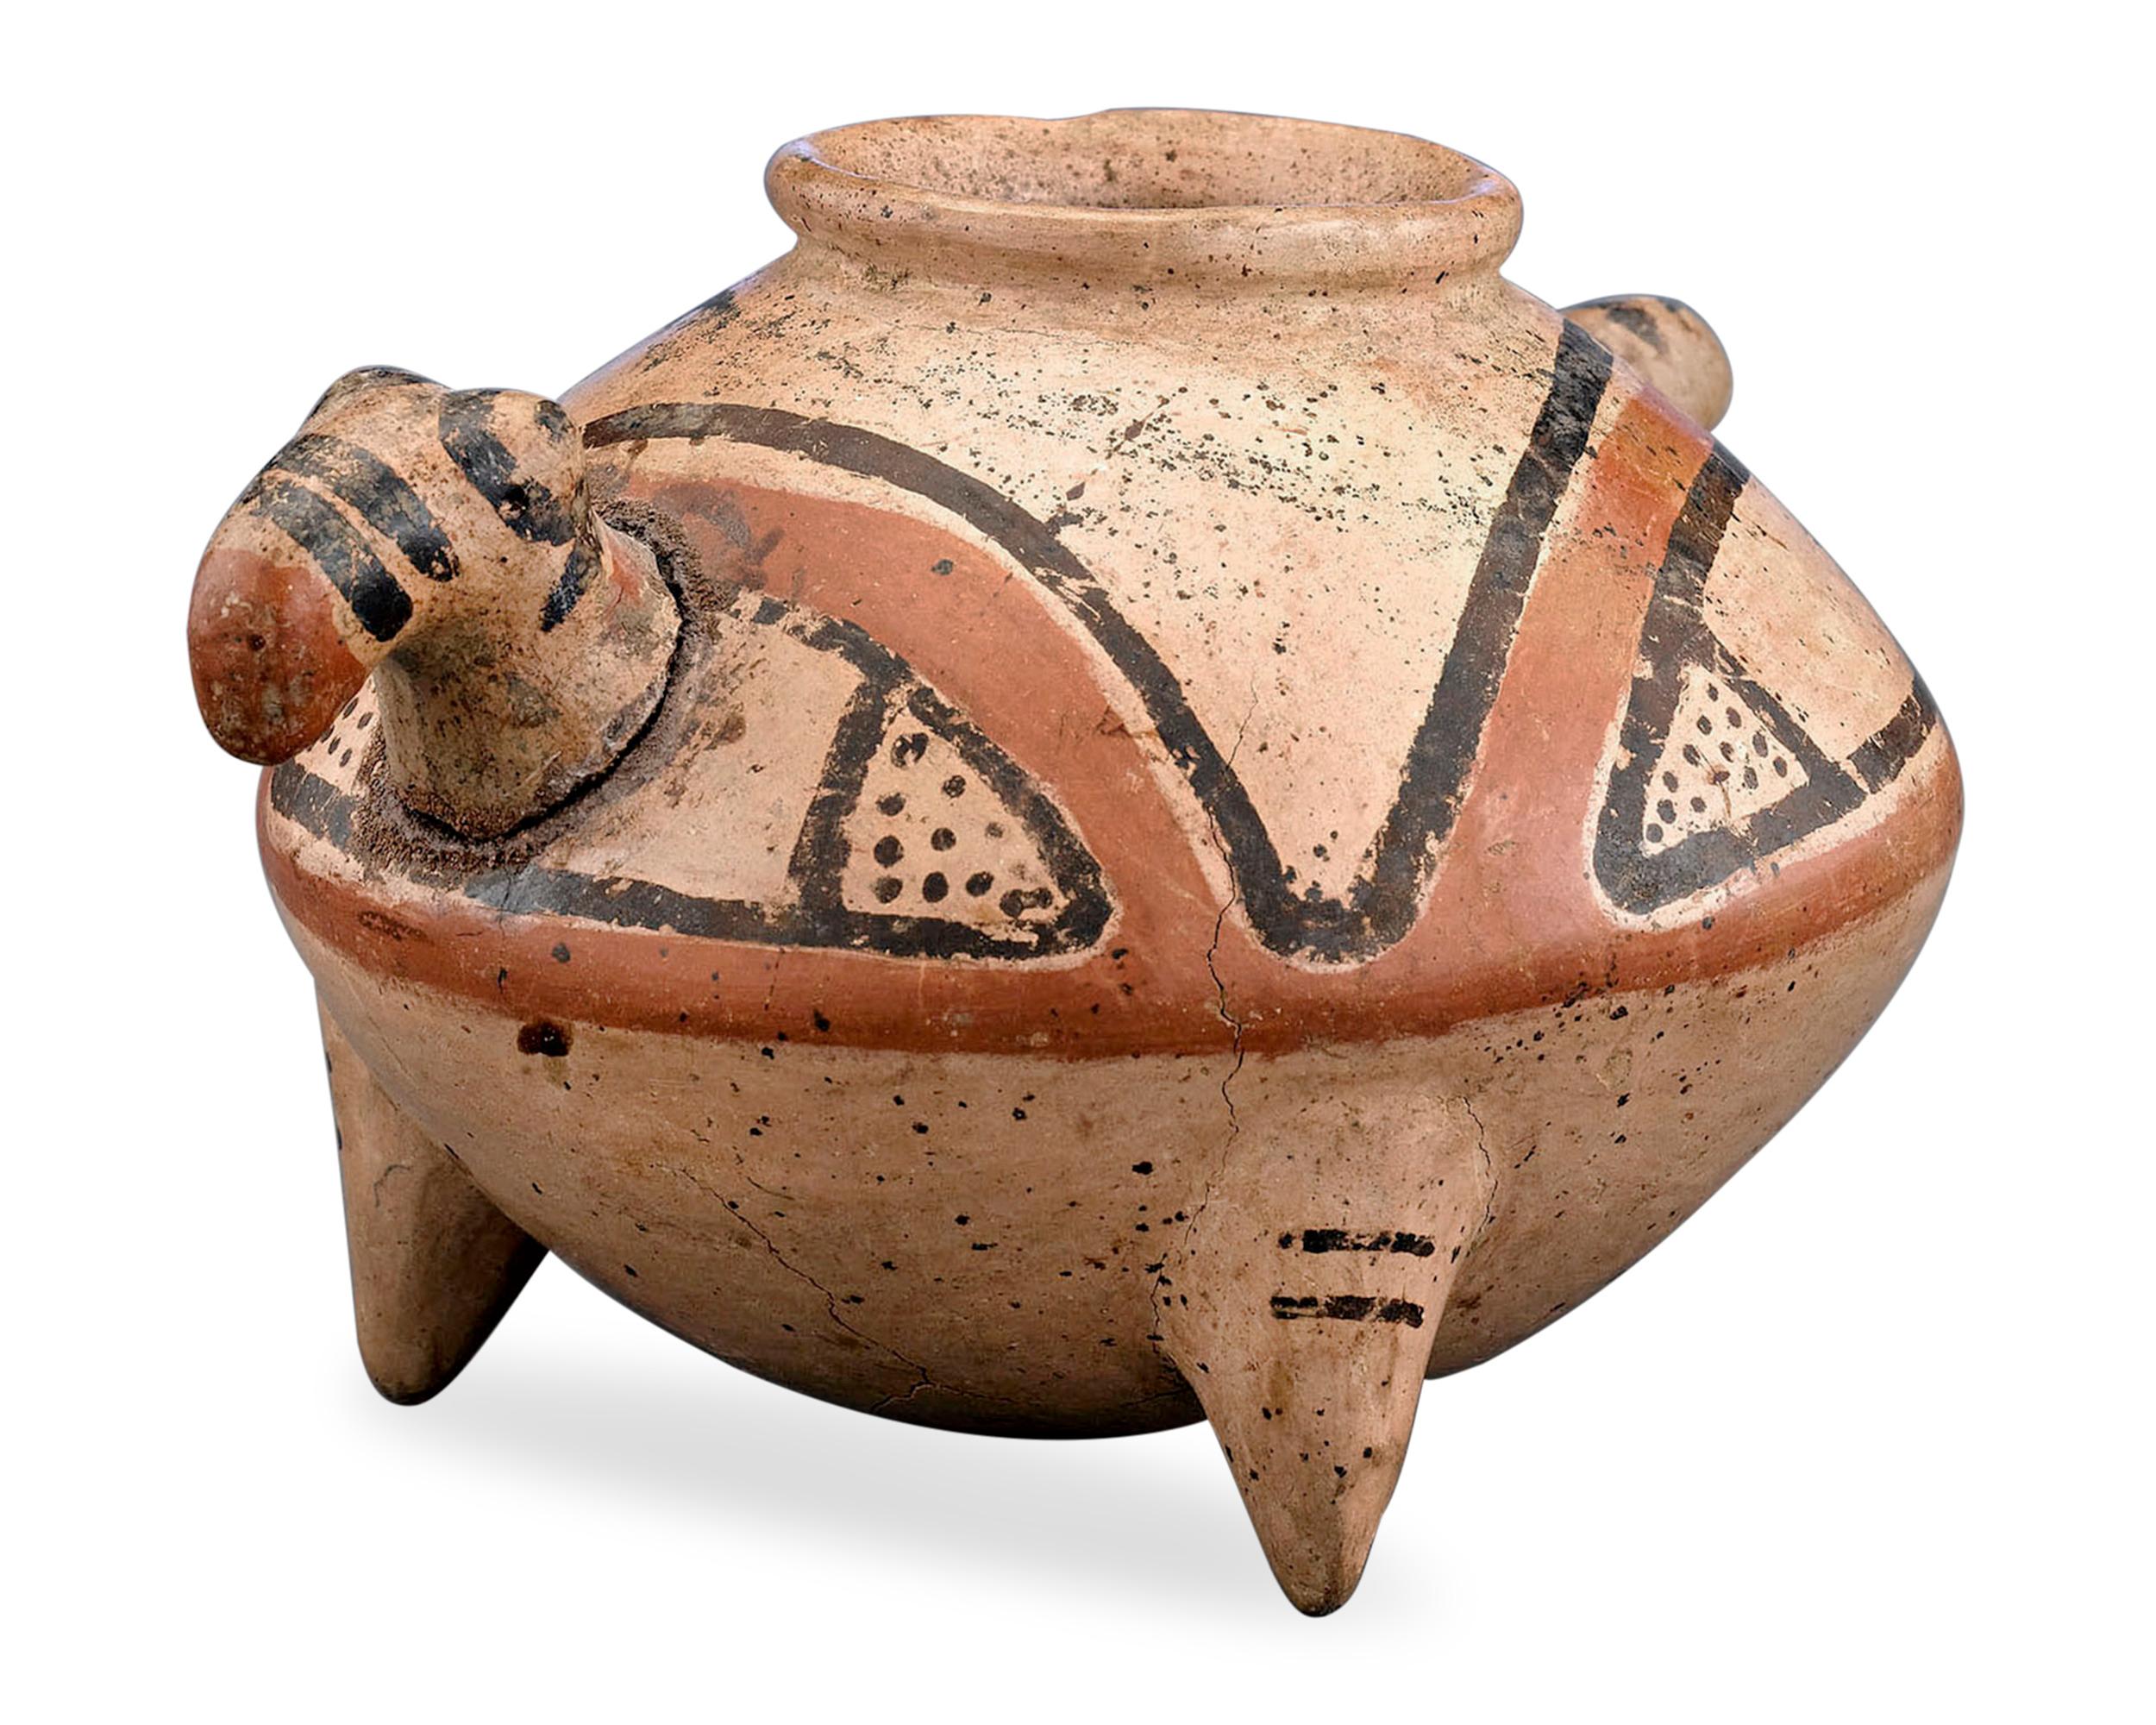 This rare Pre-Columbian vessel from the ancient Diquís culture of present-day Costa Rica possesses the features of a bird. The three-pegged jar was a common type of burial vessel, meaning it once would have been used during important funerary